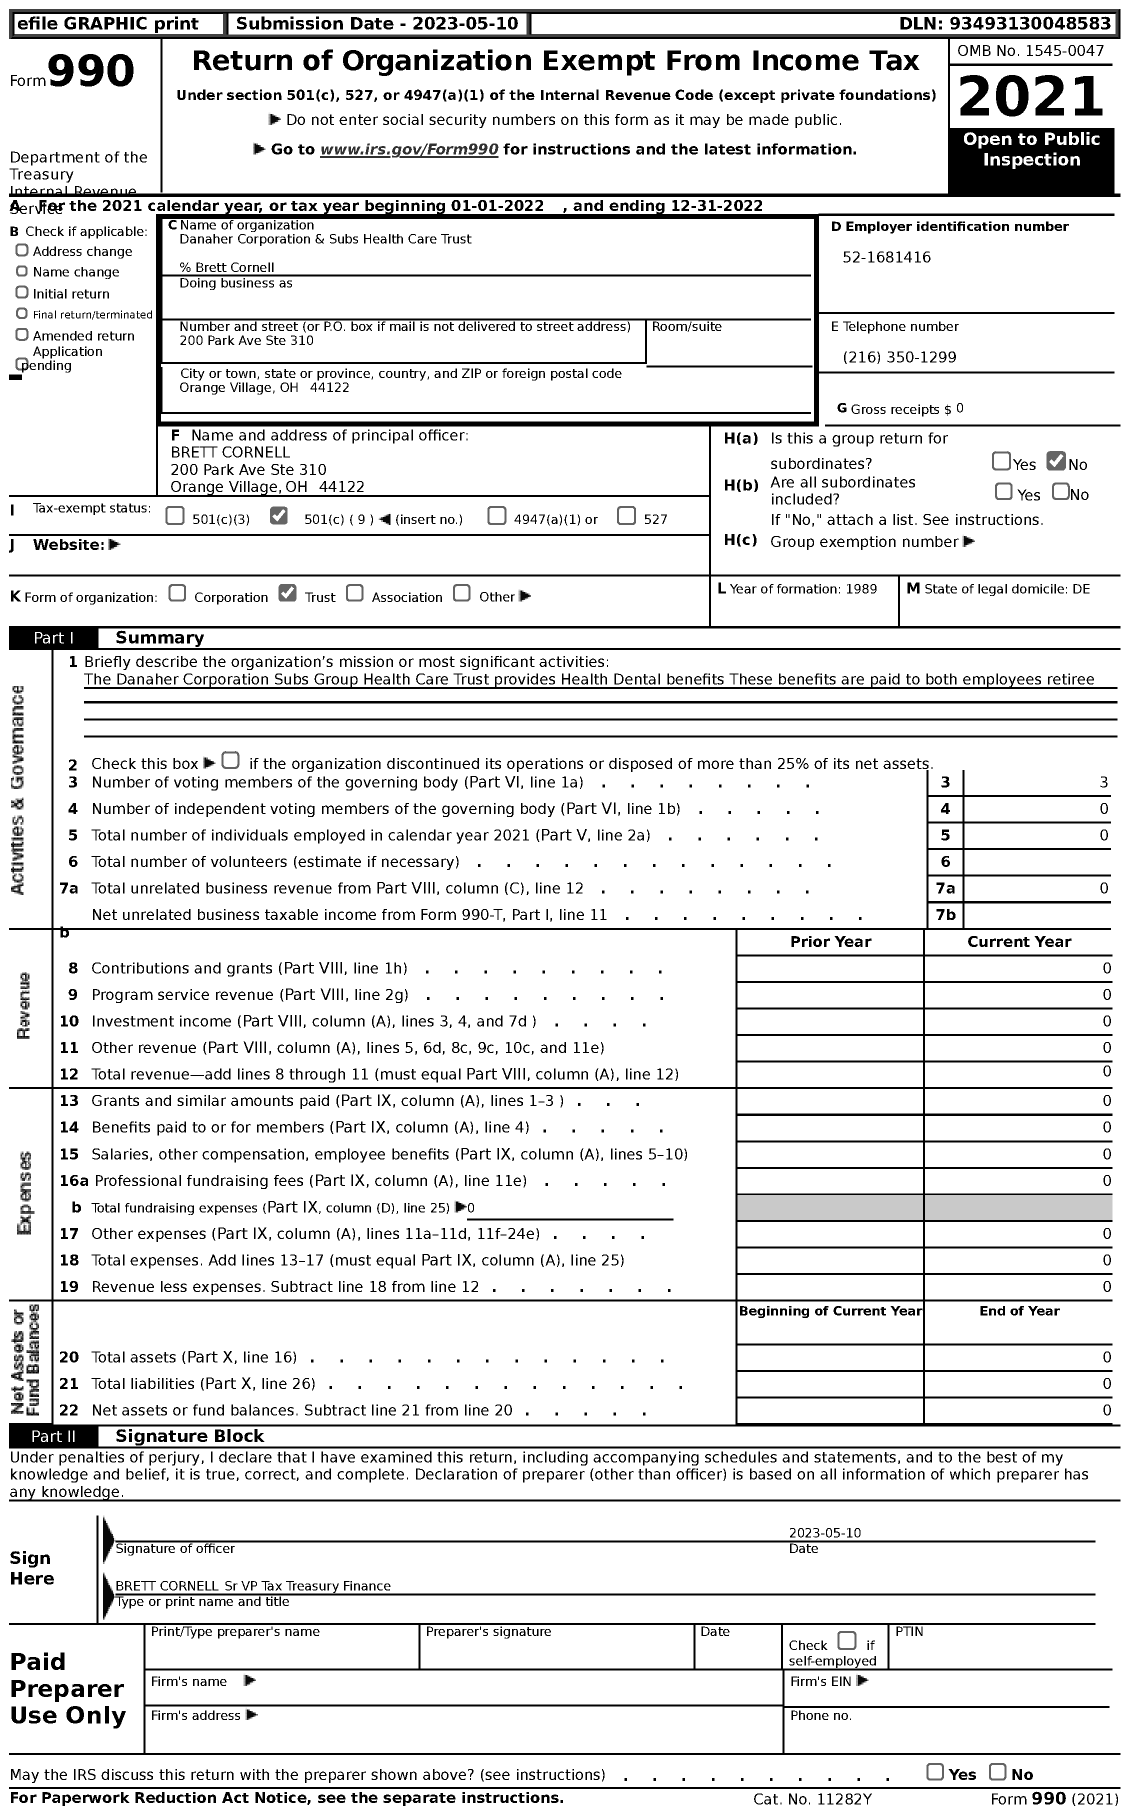 Image of first page of 2022 Form 990 for Danaher Corporation & Subs Health Care Trust